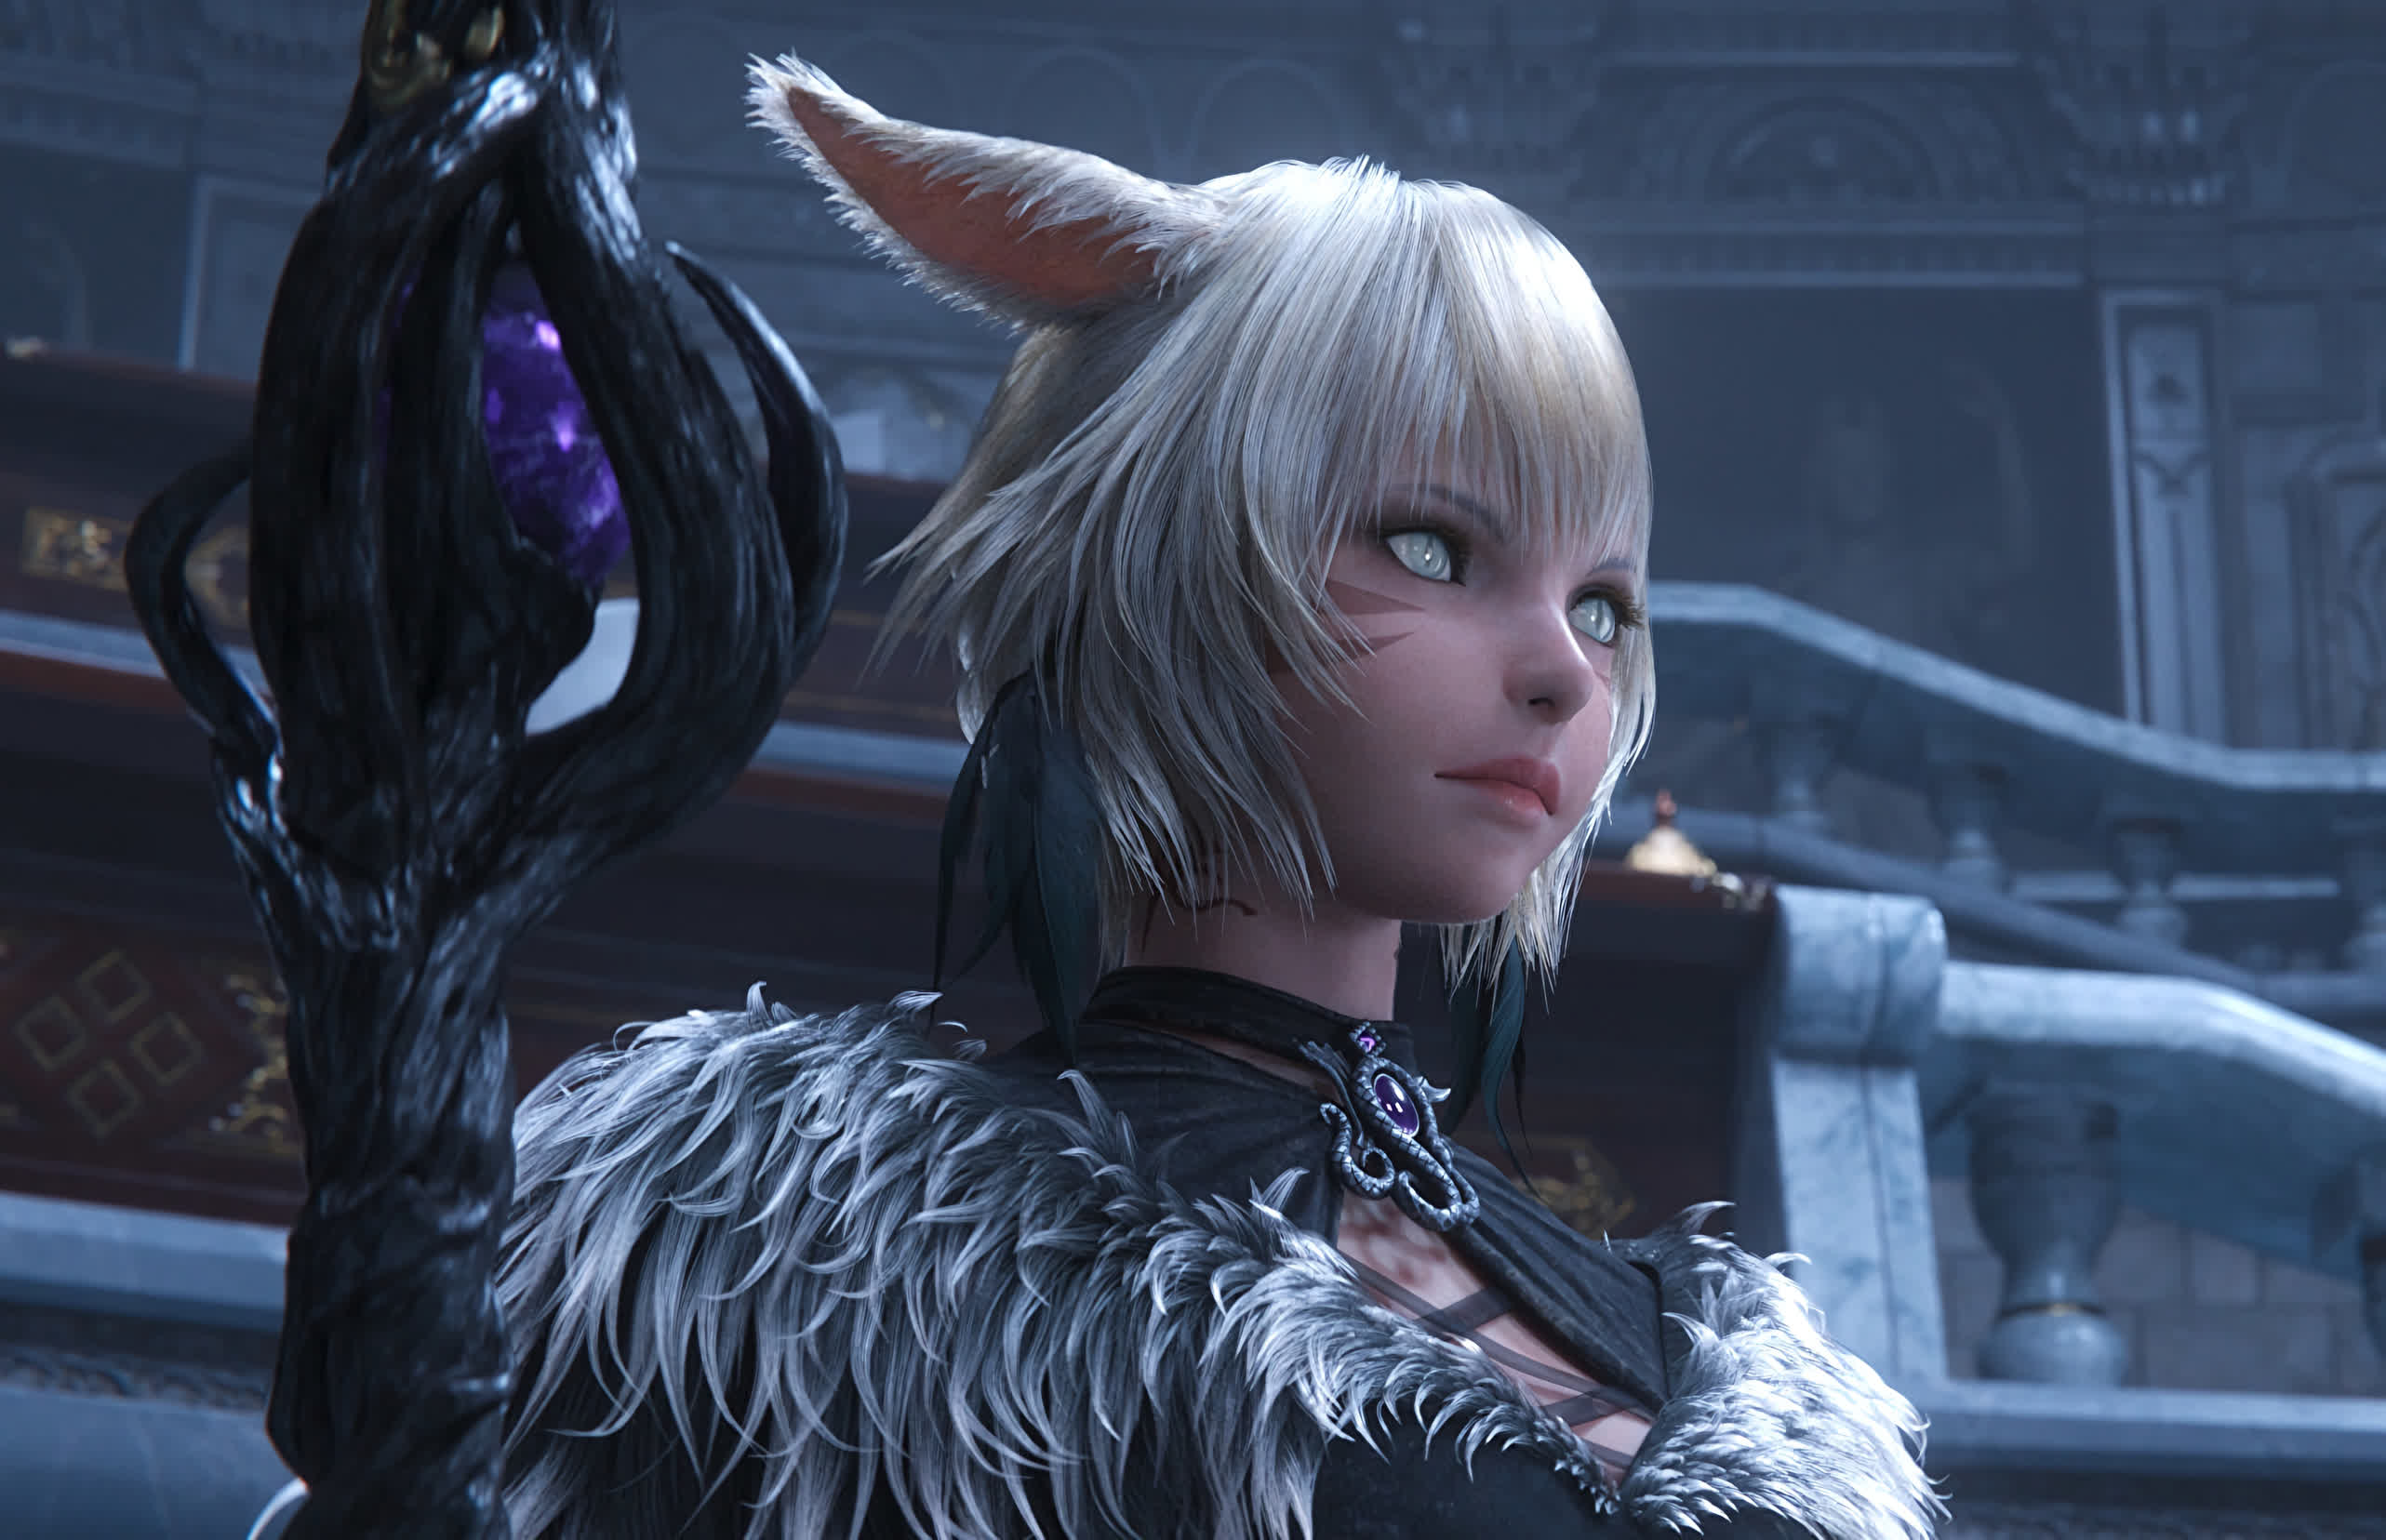 Final Fantasy XIV free trial returns on February 22 ahead of graphical update